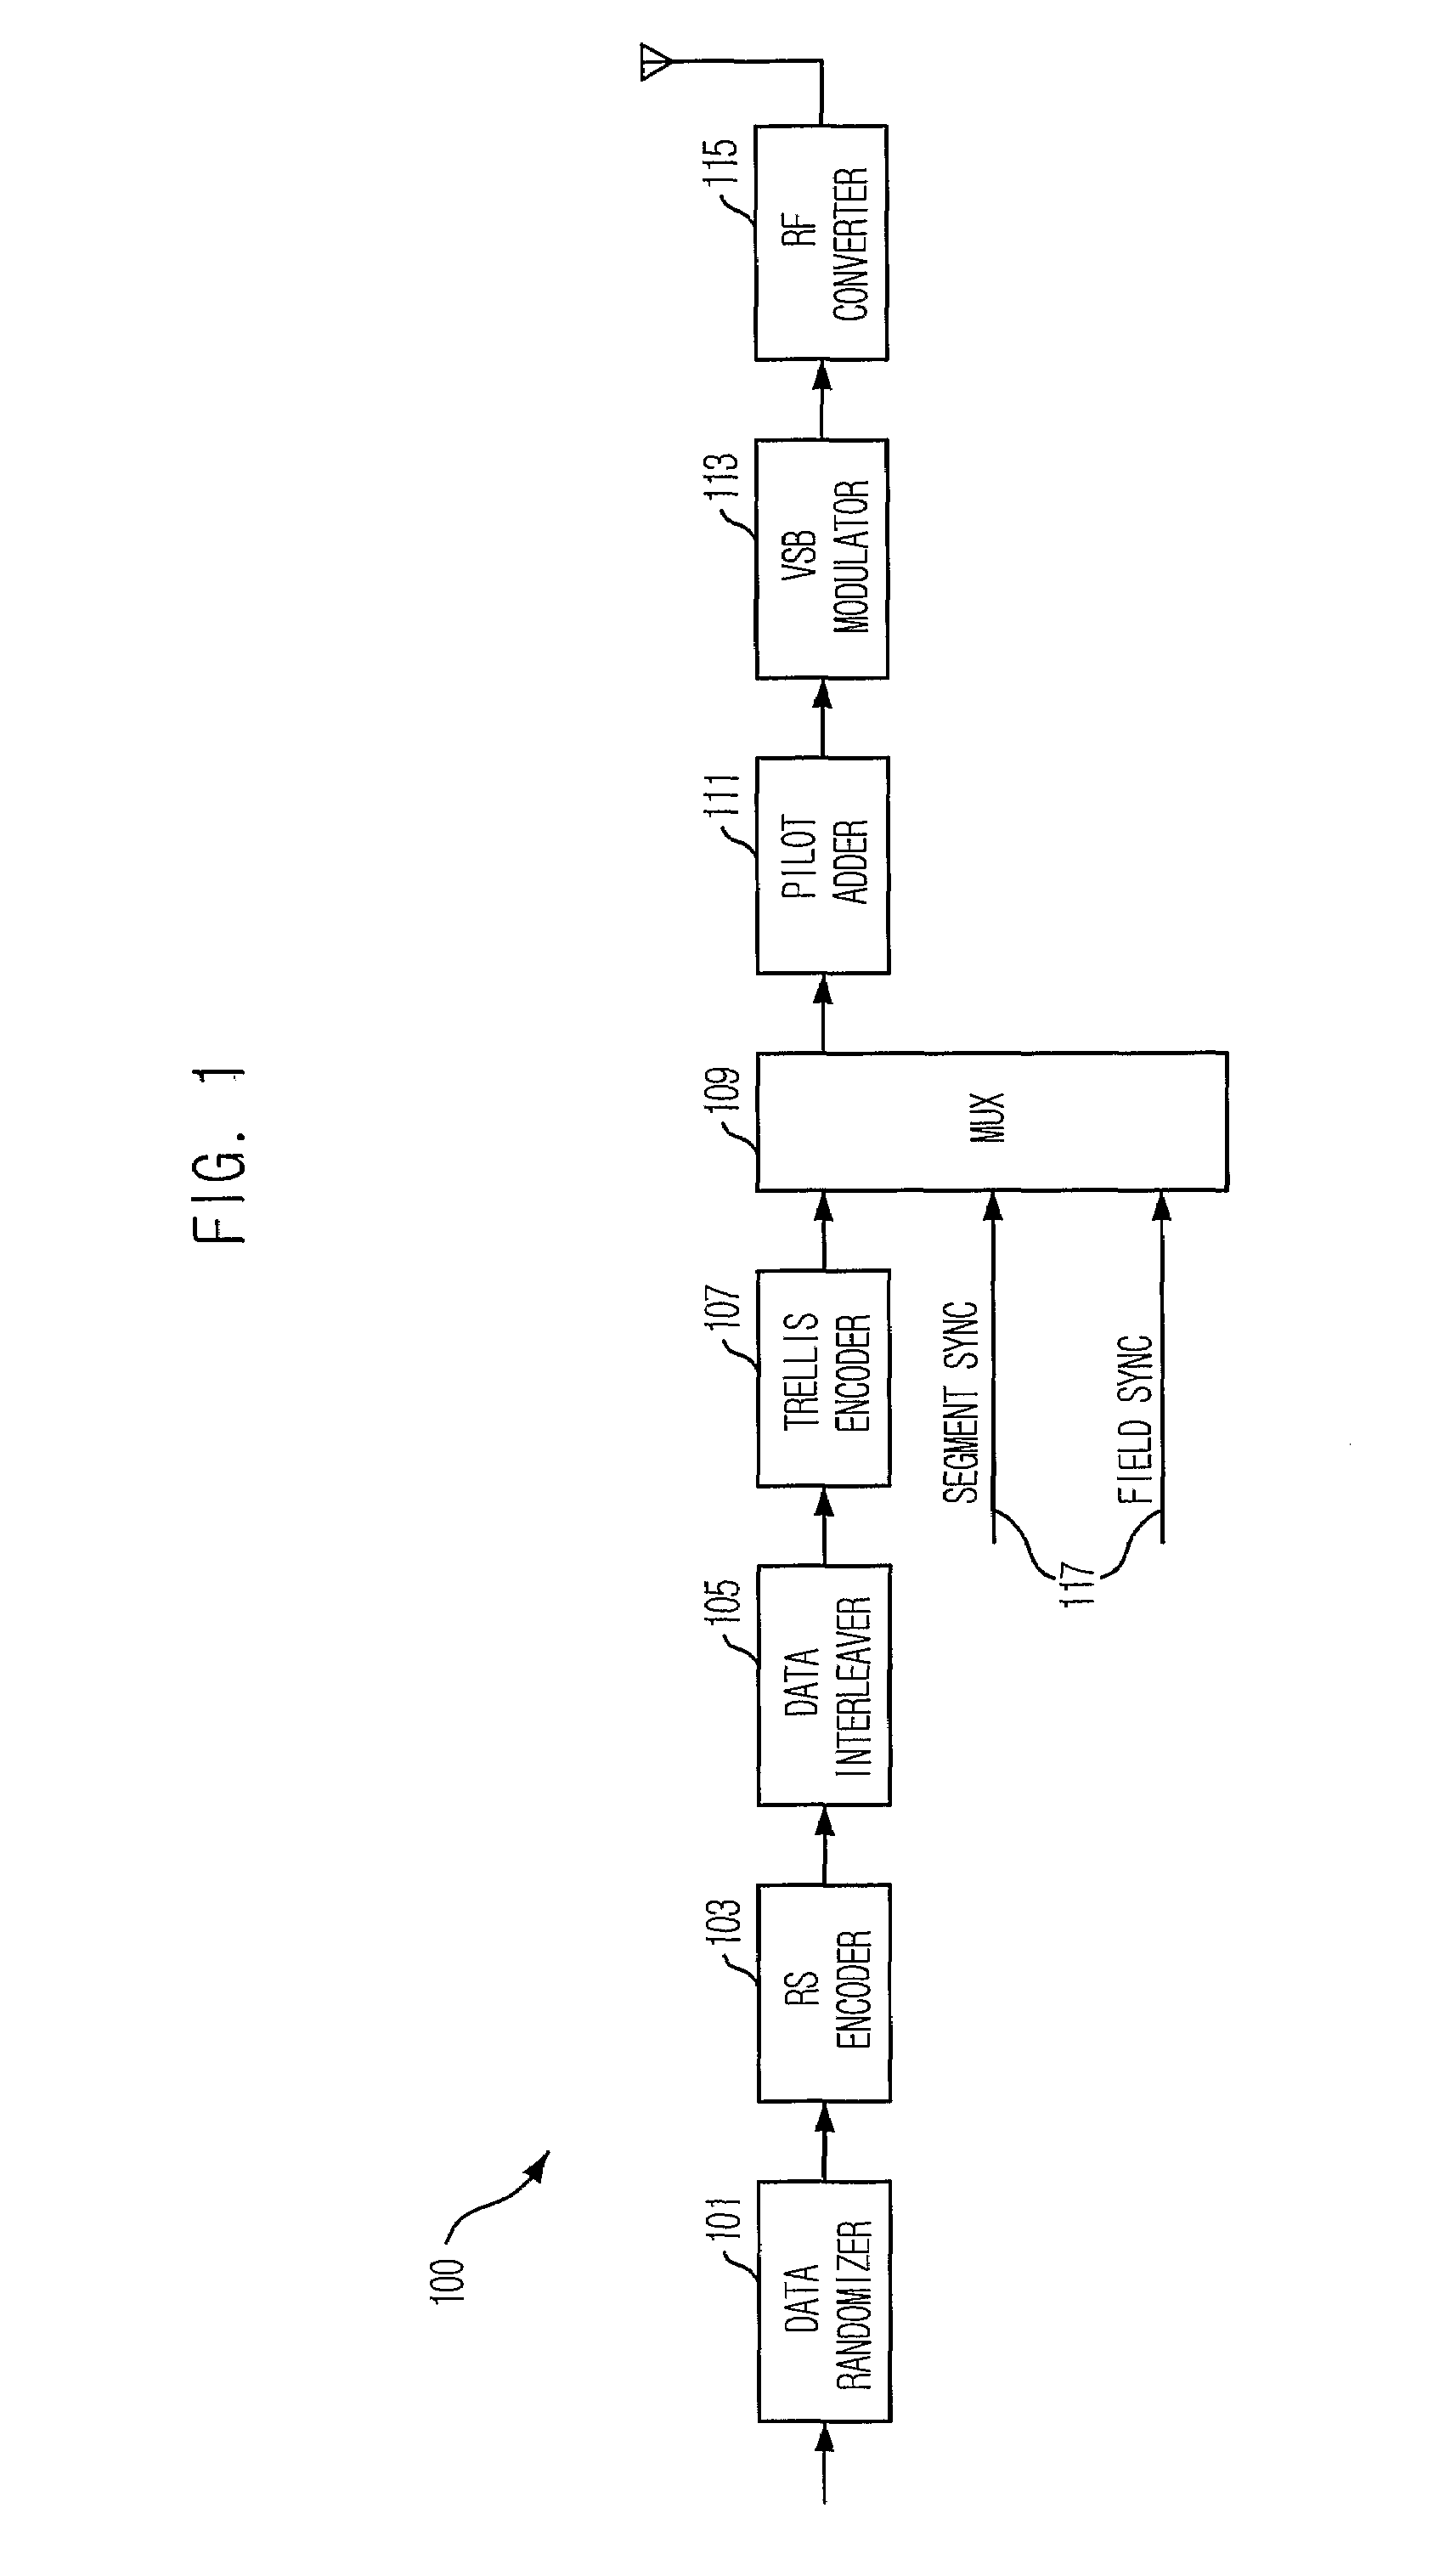 Digital television transmission and receiving apparatus and method using 1/4 rate coded robust data